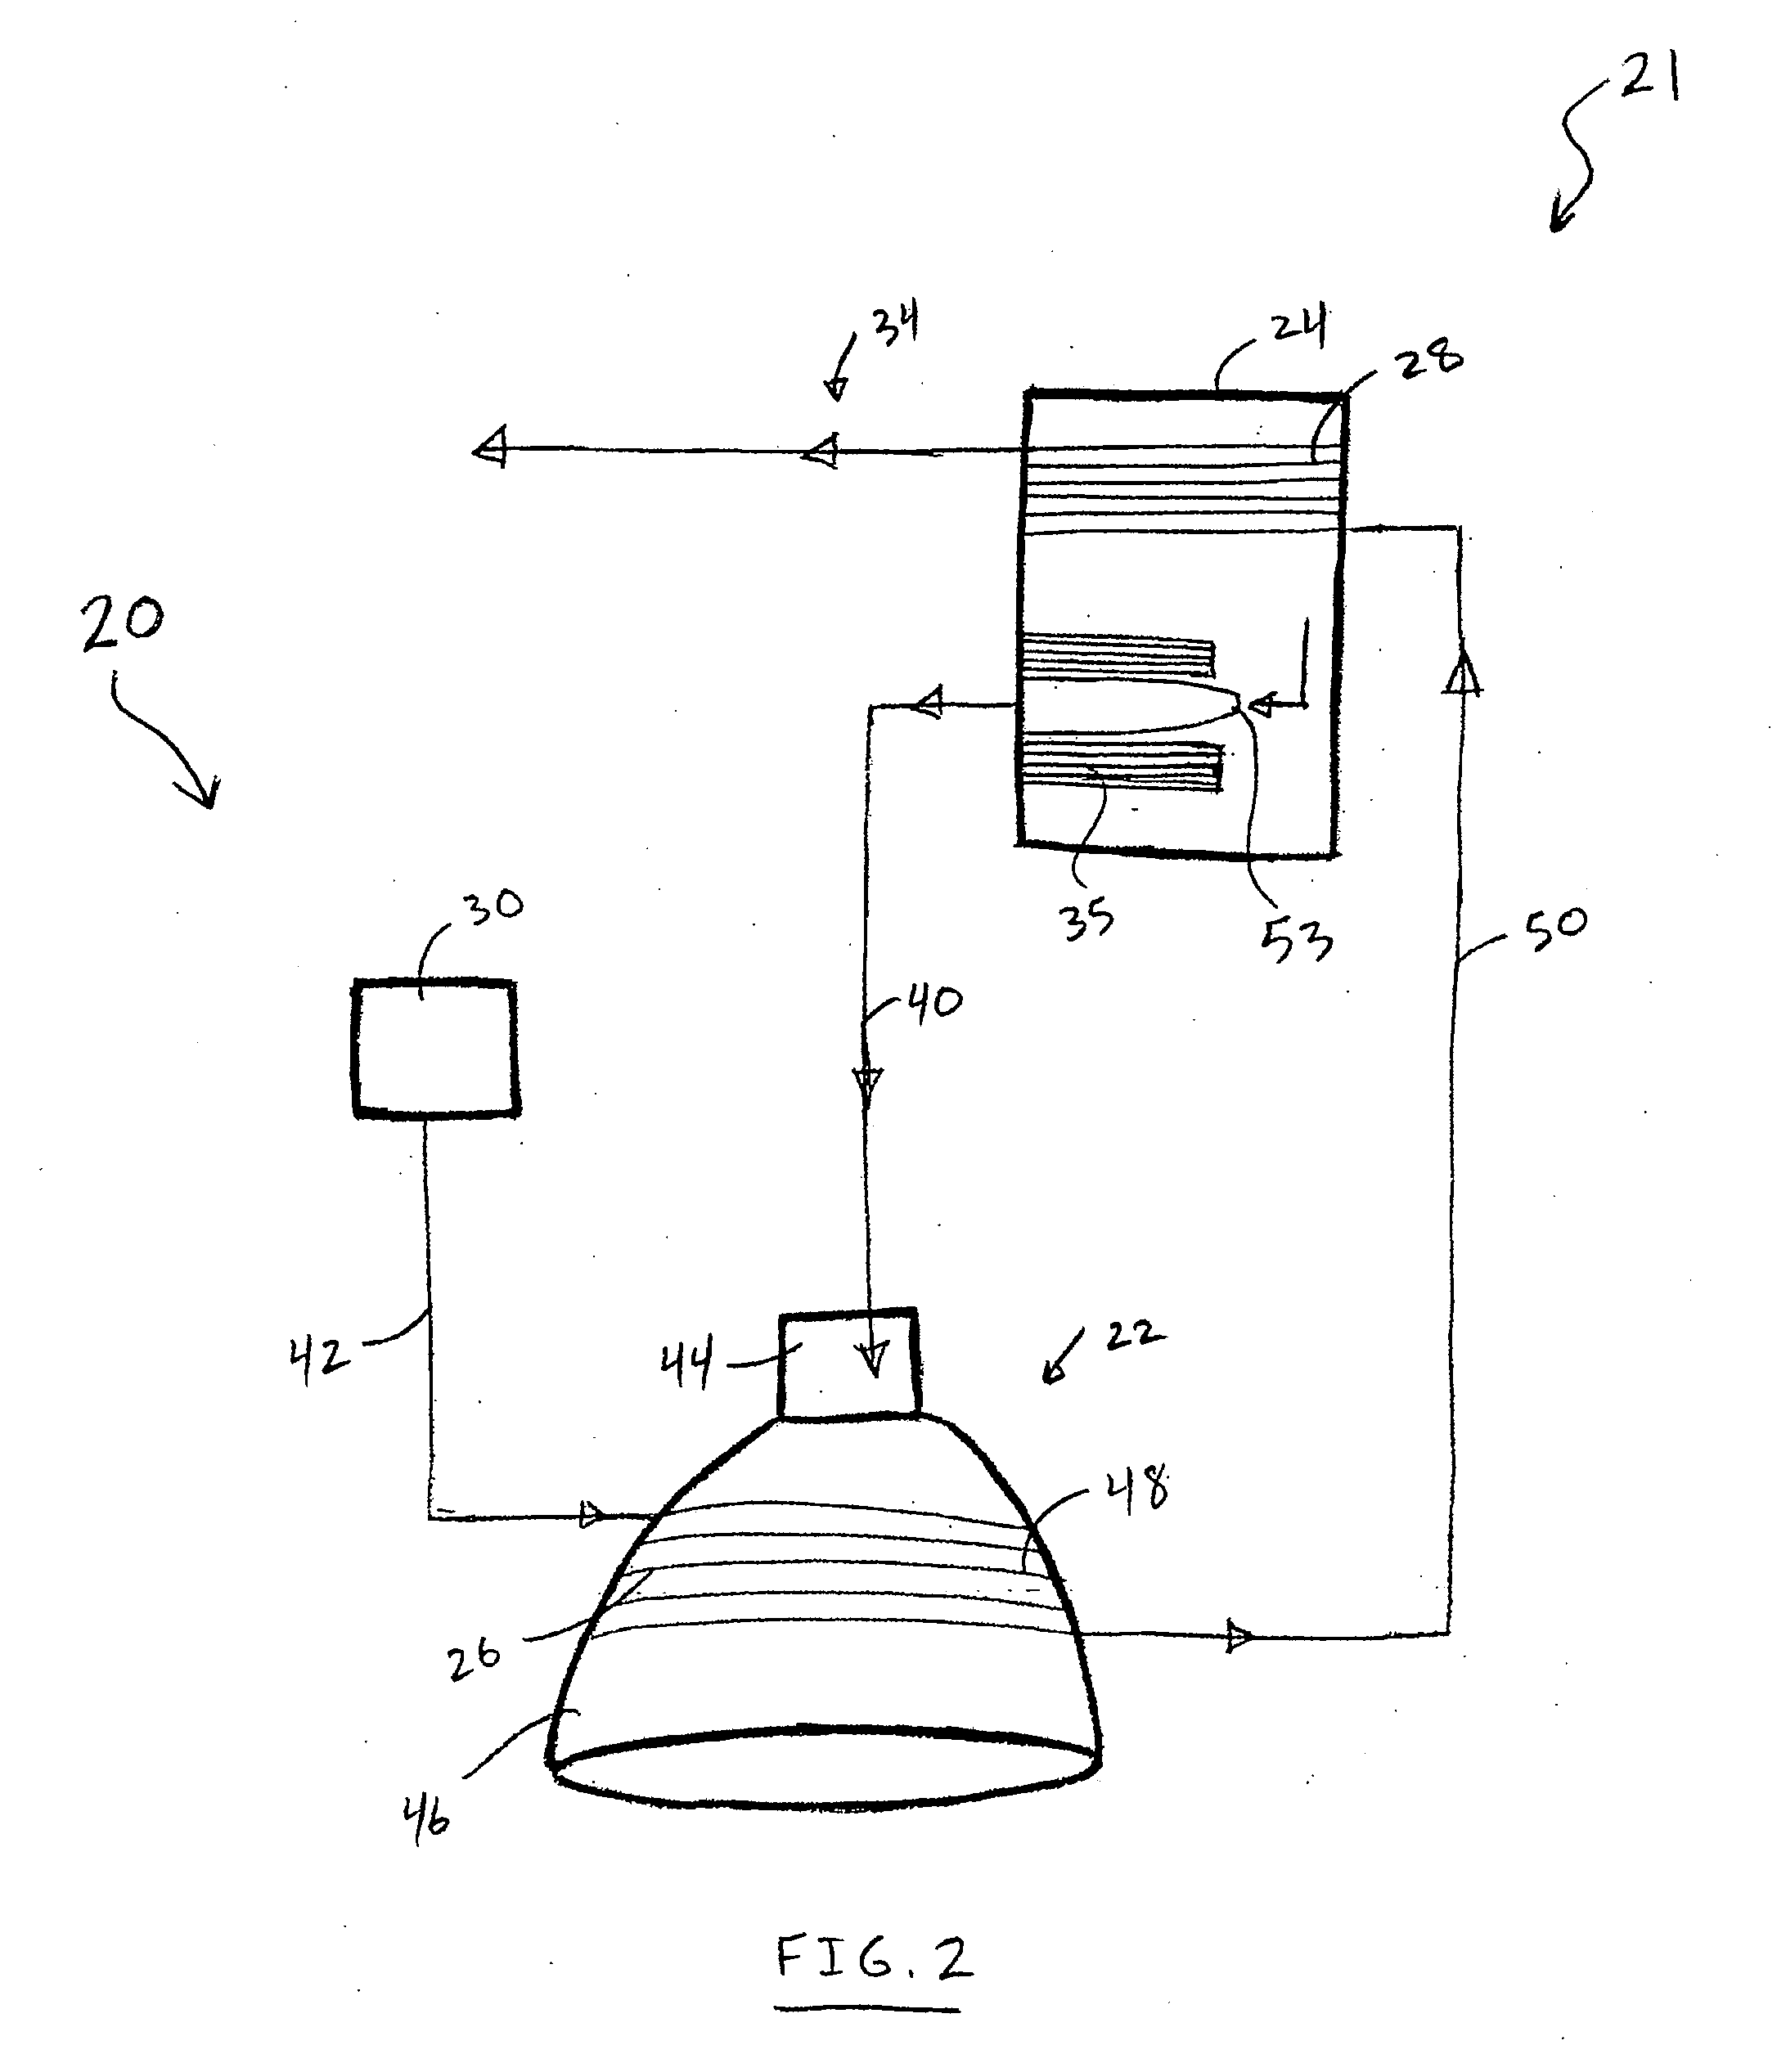 System and method for cooling rocket engines